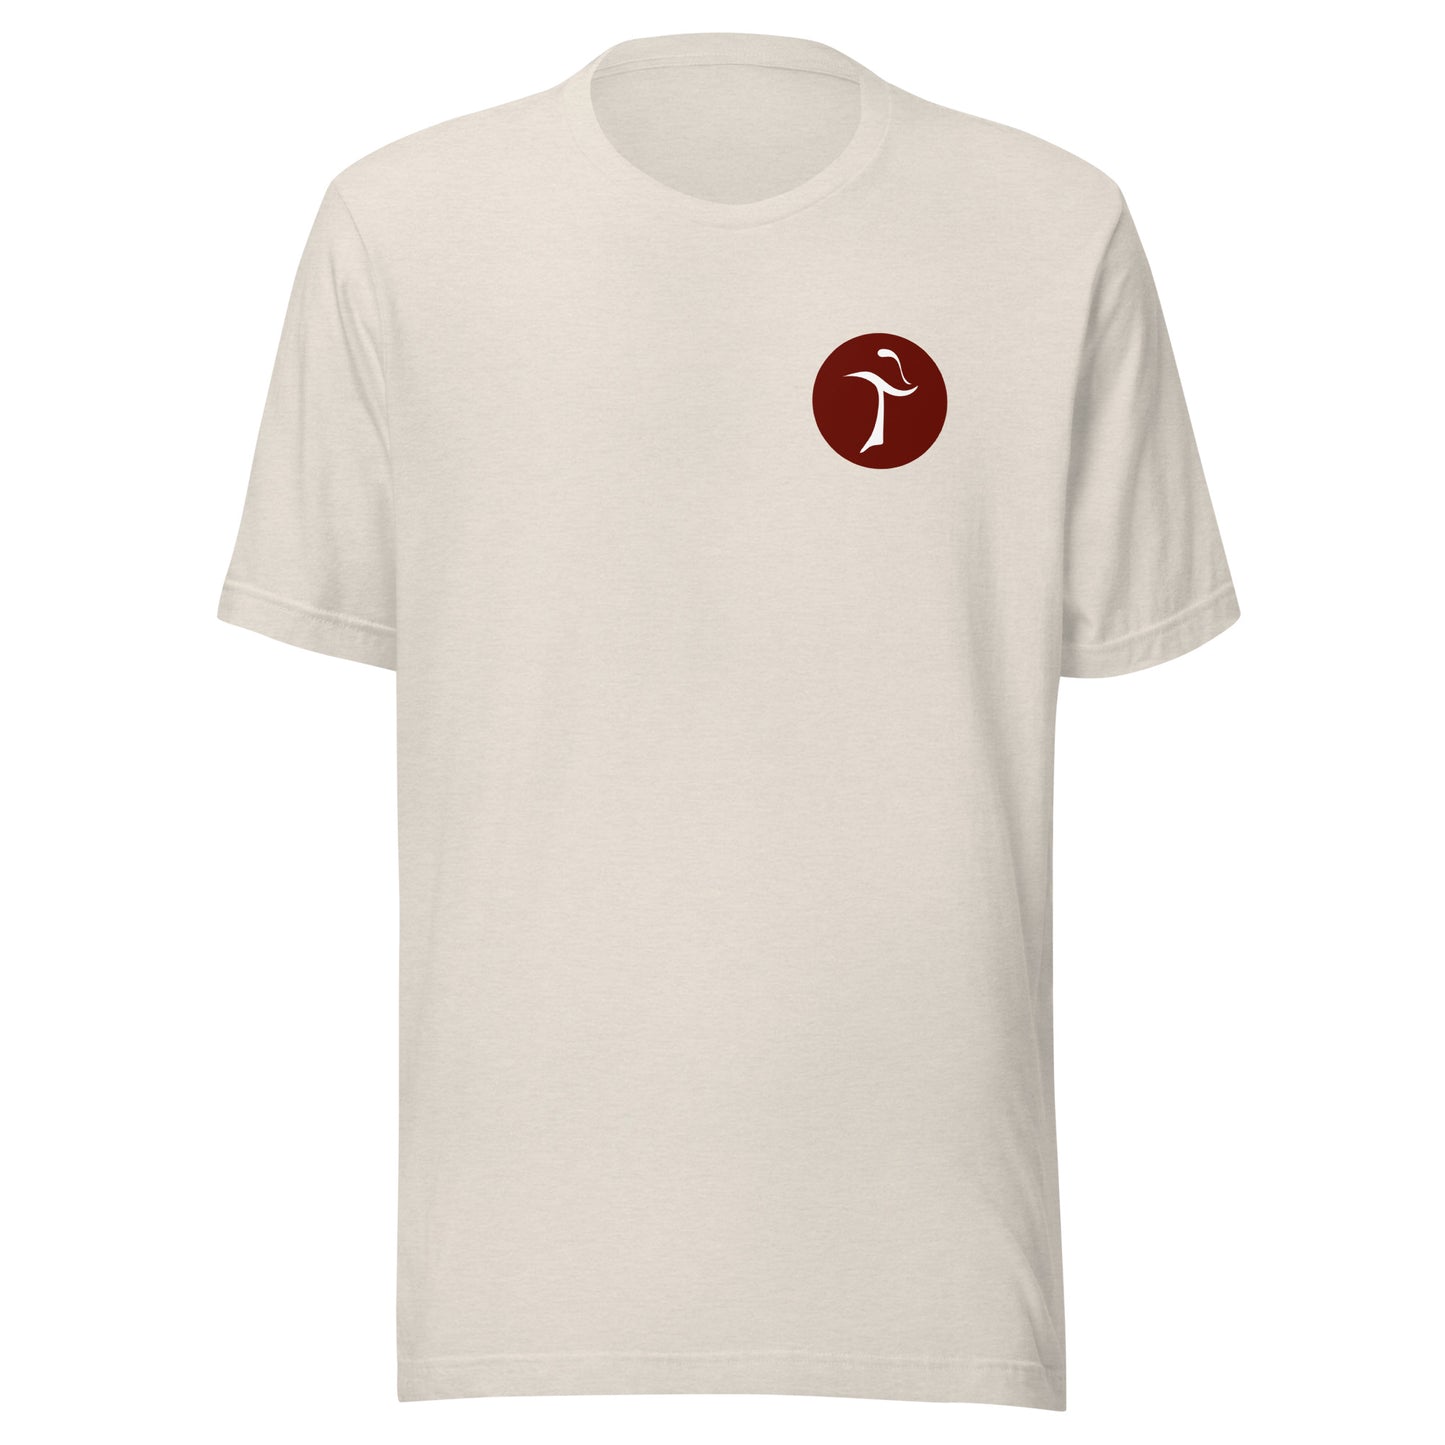 Brother and Sister Logo - T-shirt